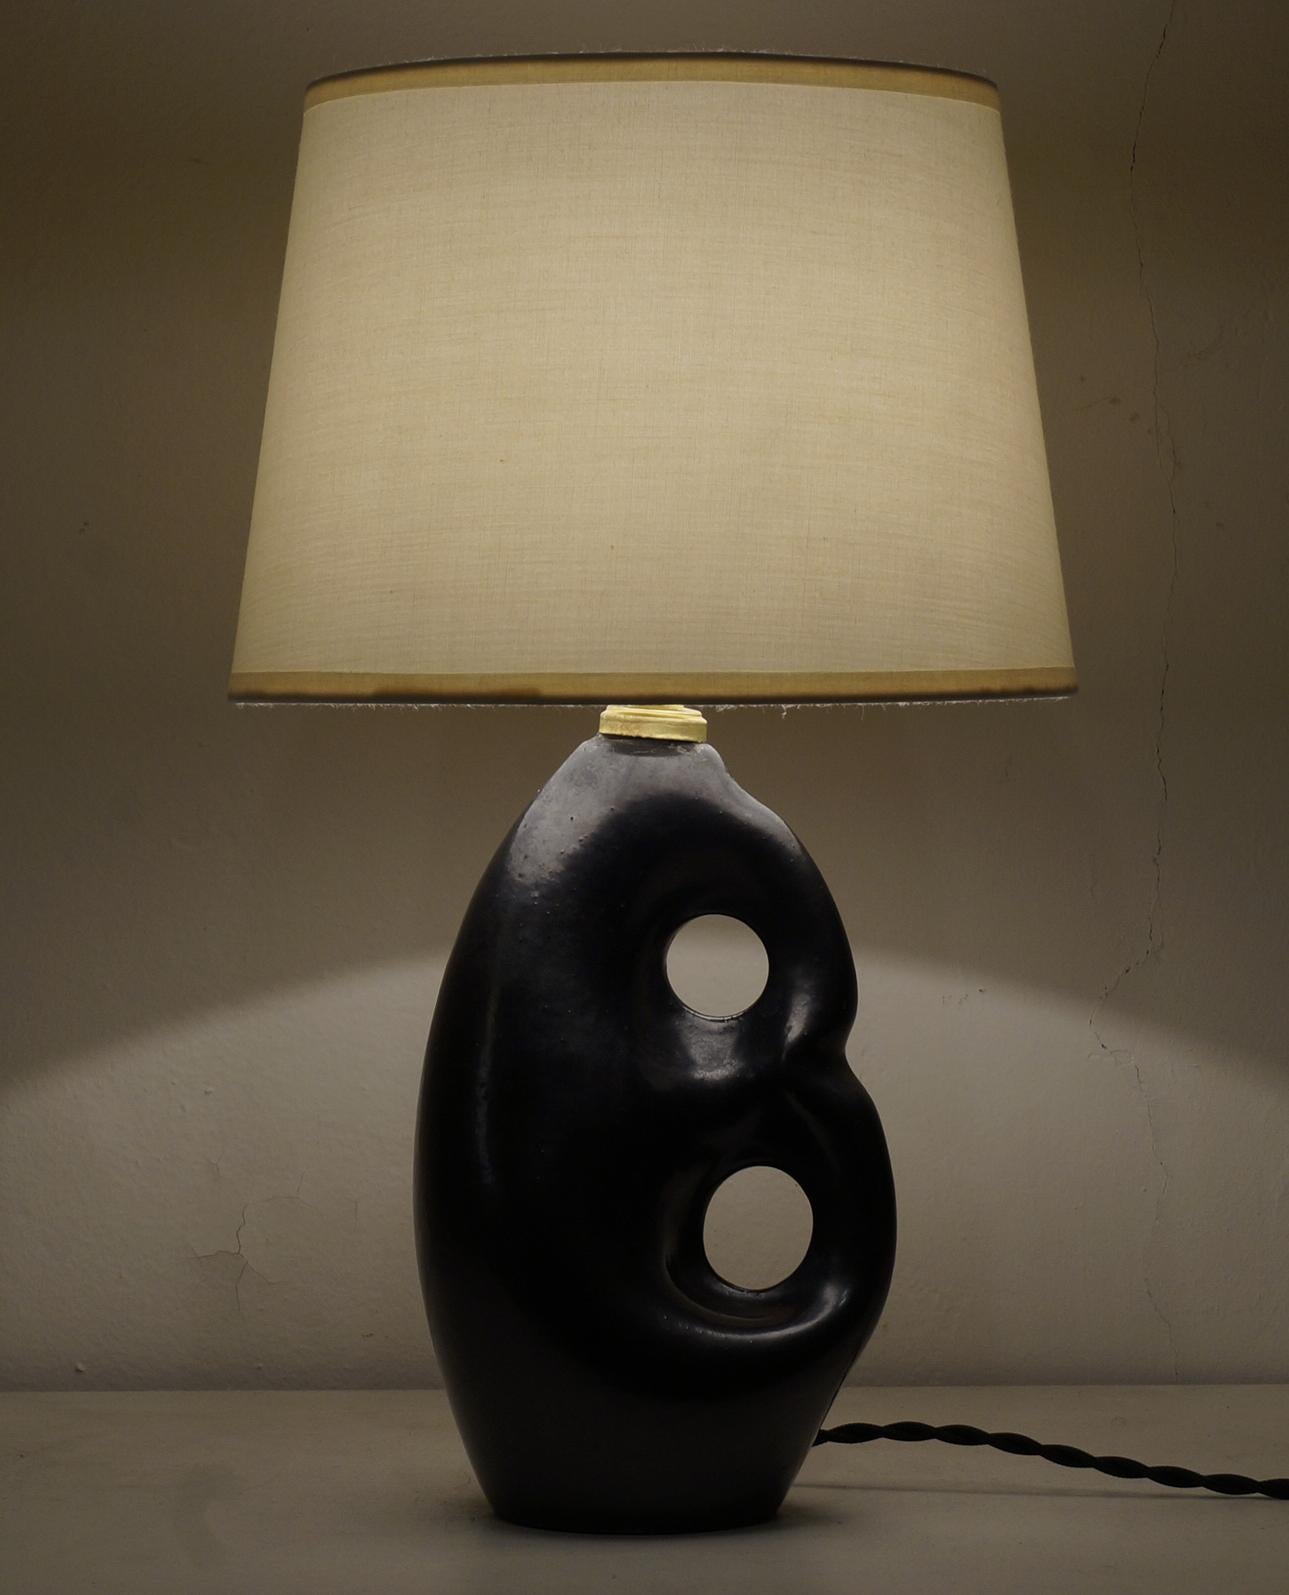 Black satin ceramic table lamp, custom made fabric lampshade, rewired with twisted silk cord.

Measure: Ceramic body height 21 cm, 8.3 in.
Height with lampshade 38 cm, 15 in.

  